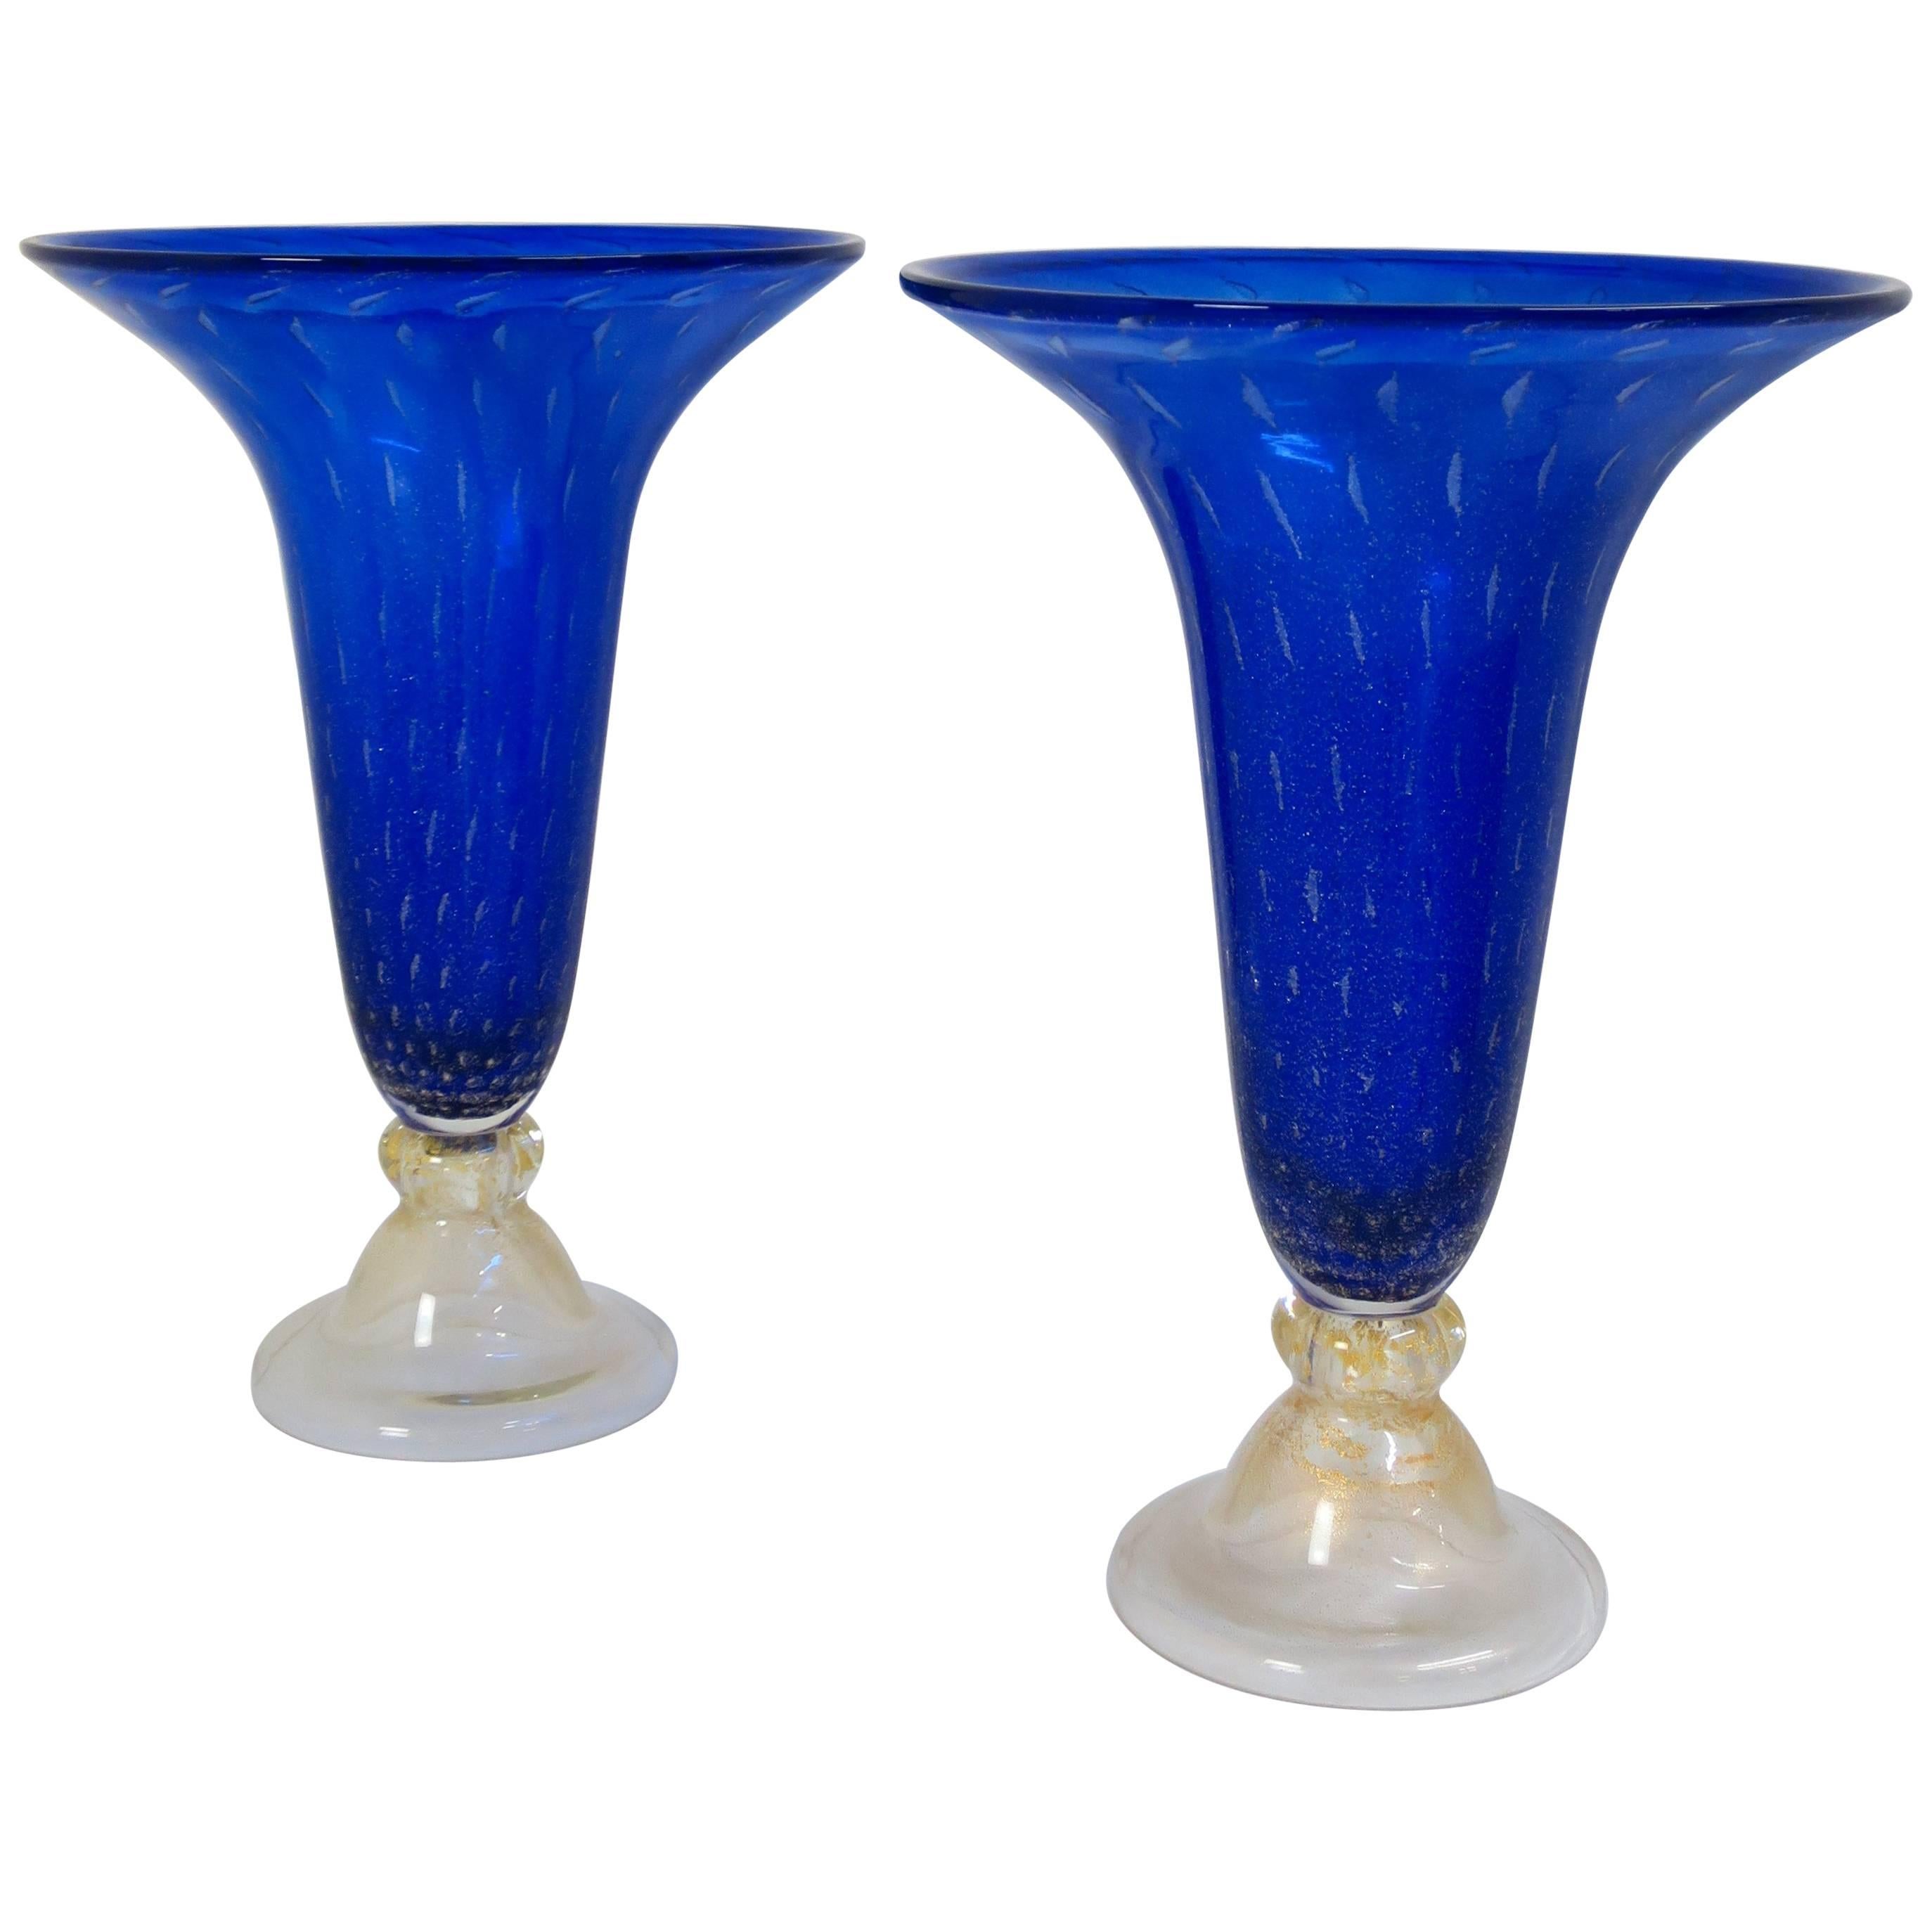 Exquisite Pair of Large Royal Blue Murano Glass Vases For Sale